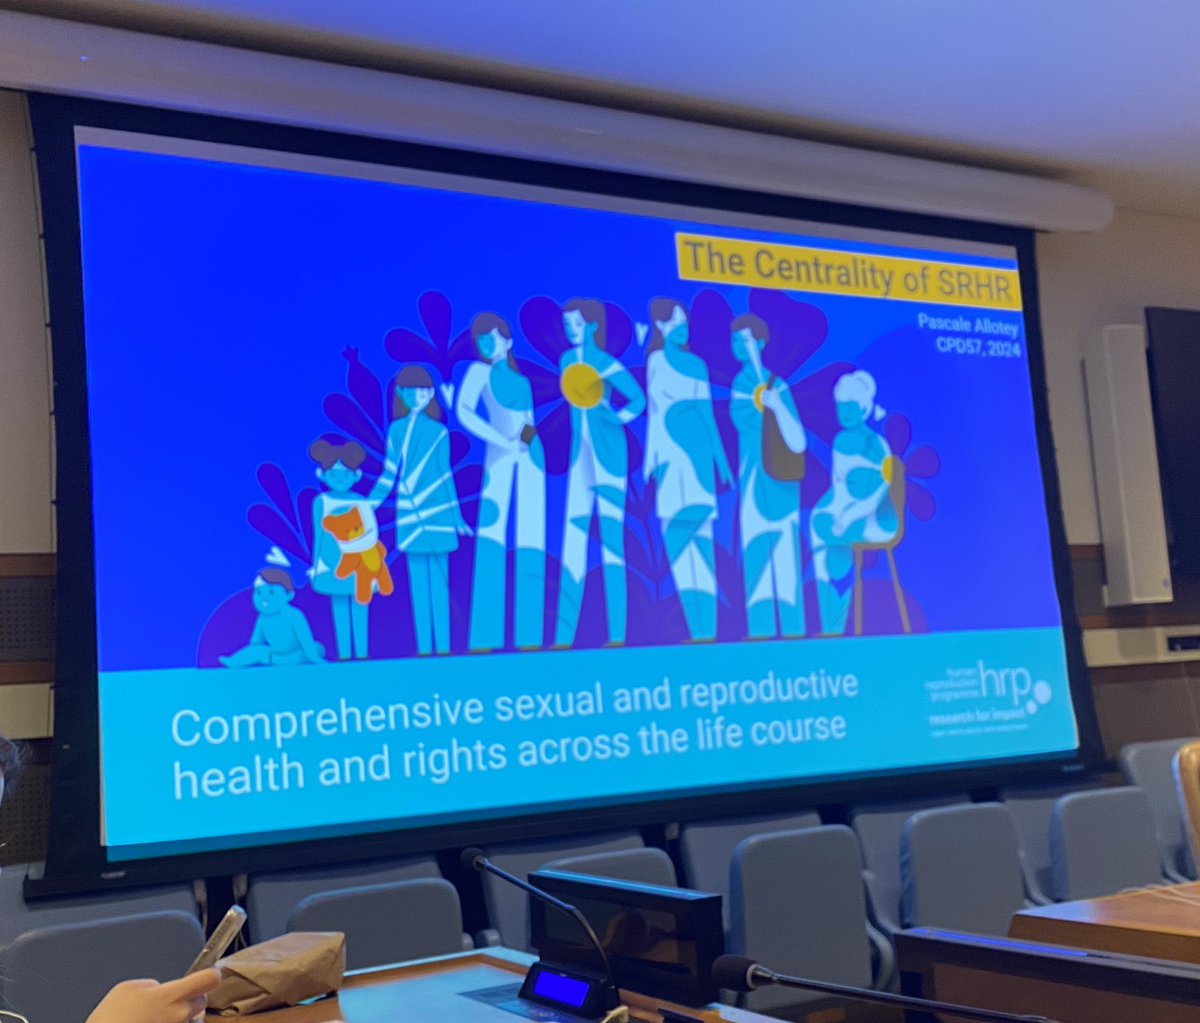 “Availability and quality of #SRHR services is a litmus test for the strength of a health system. Through assessing SRHR services, we determine areas for improvement to strengthen primary health care.” @PascaleAllotey on the centrality of SRHR. #CPD57 @HRPresearch @WHO